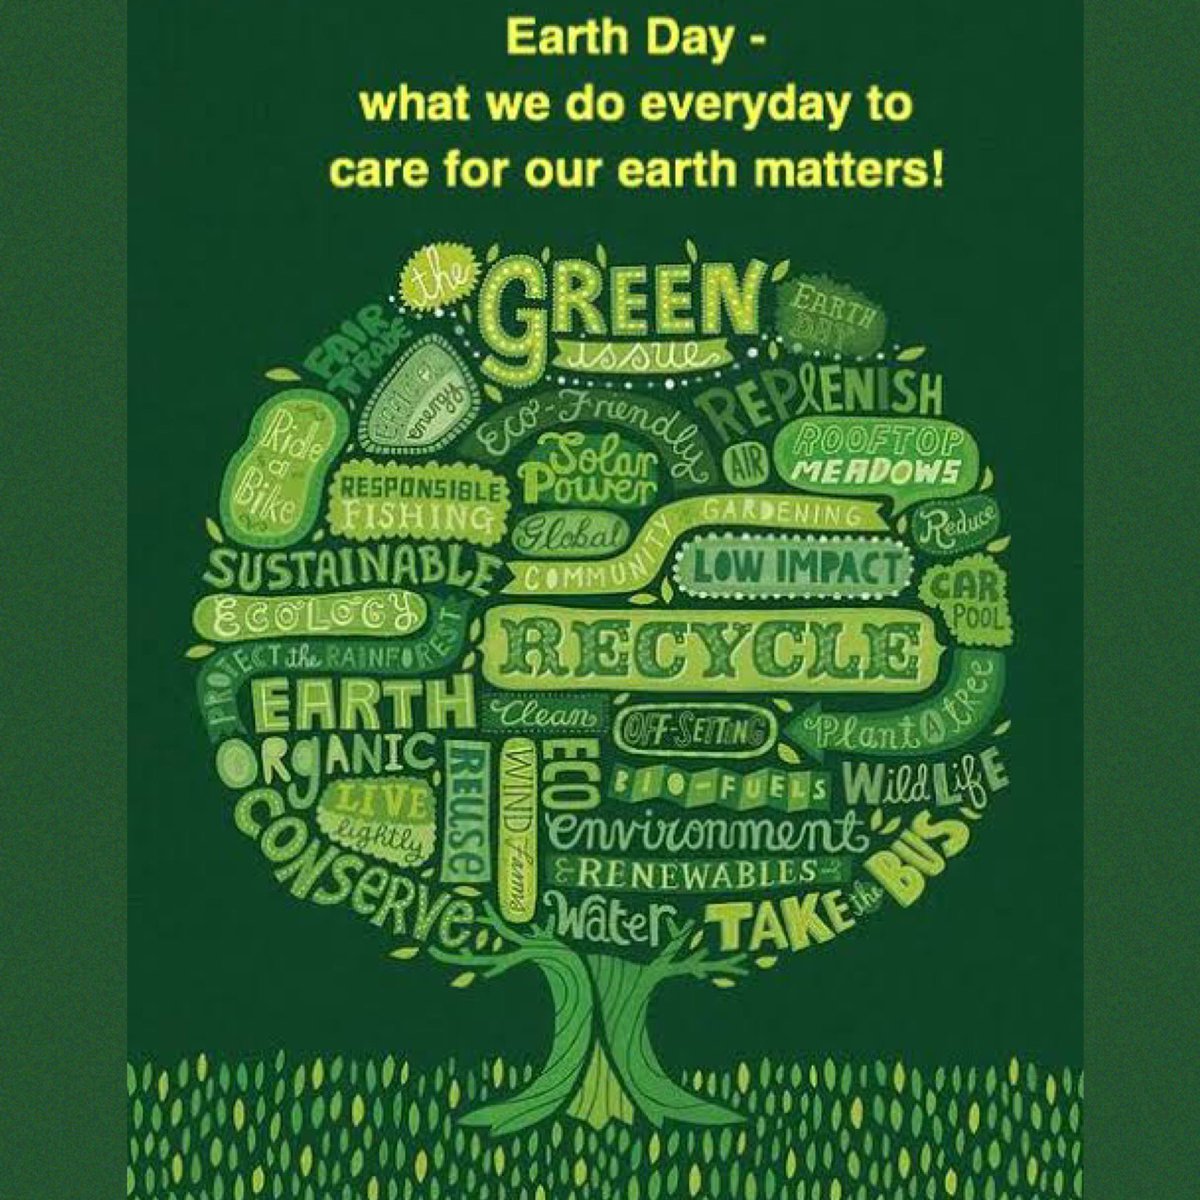 This #EarthDay, remember it’s more than 1 day- it should be a continuation of our ongoing environmental and sustainability efforts. Our relationship with nature and how our actions affect it must drive us, so our kids and future generations have our beautiful earth to enjoy too.